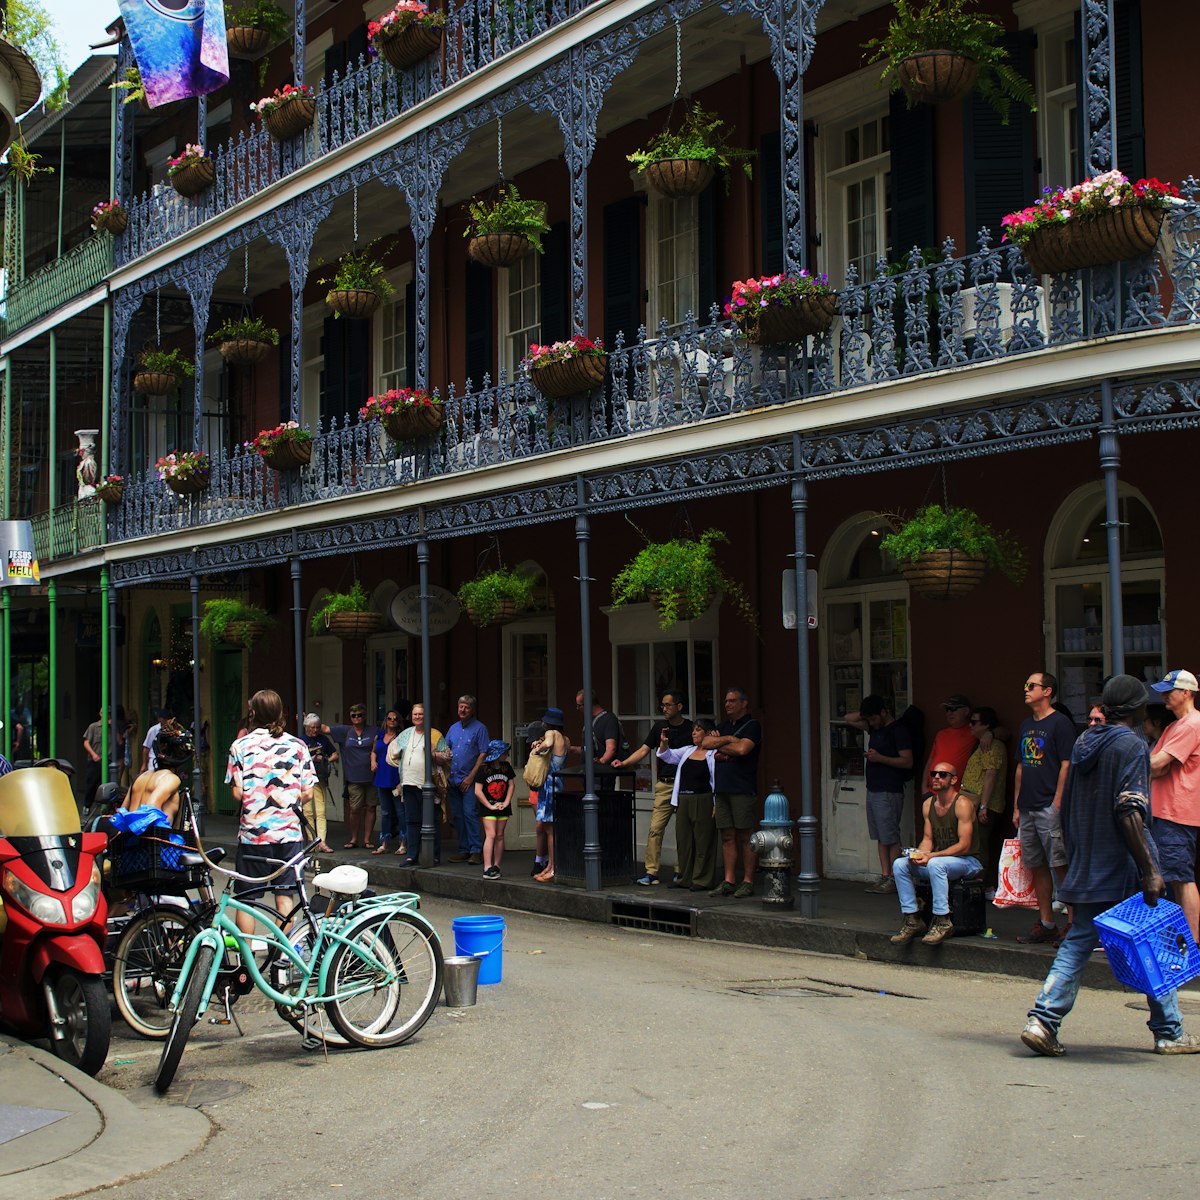 A crowd on Royal Street in the French Quarter of New Orleans.